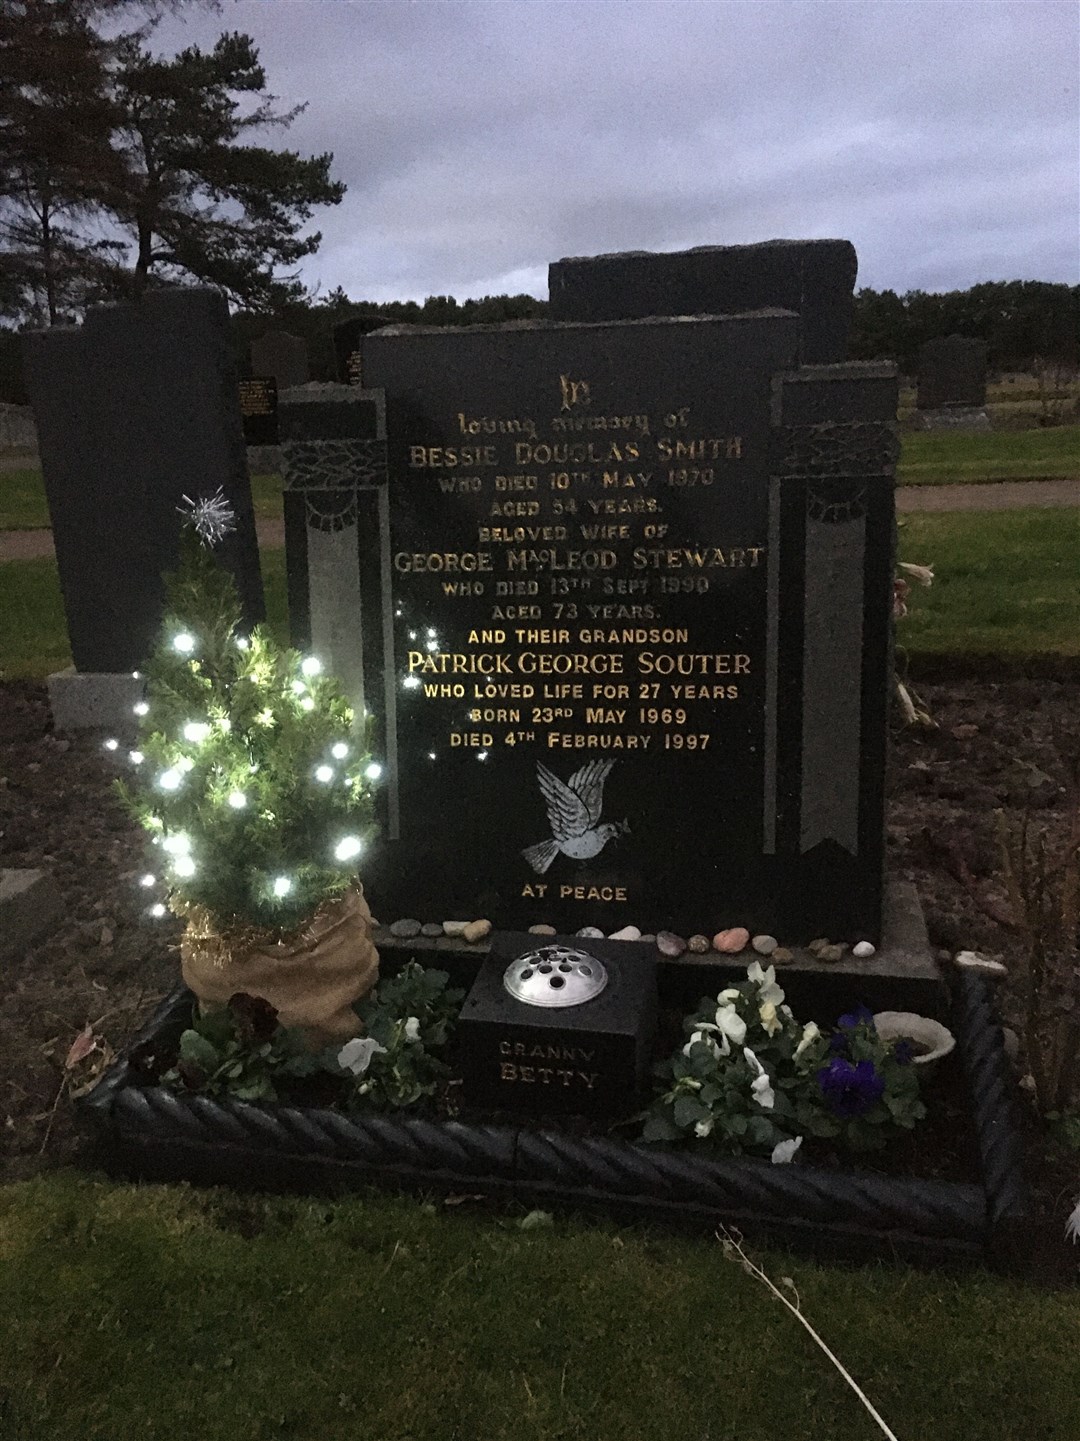 The lit-up tree at the grave of Patrick Souter at Lossiemouth Cemetery, on Inchbroom Road.